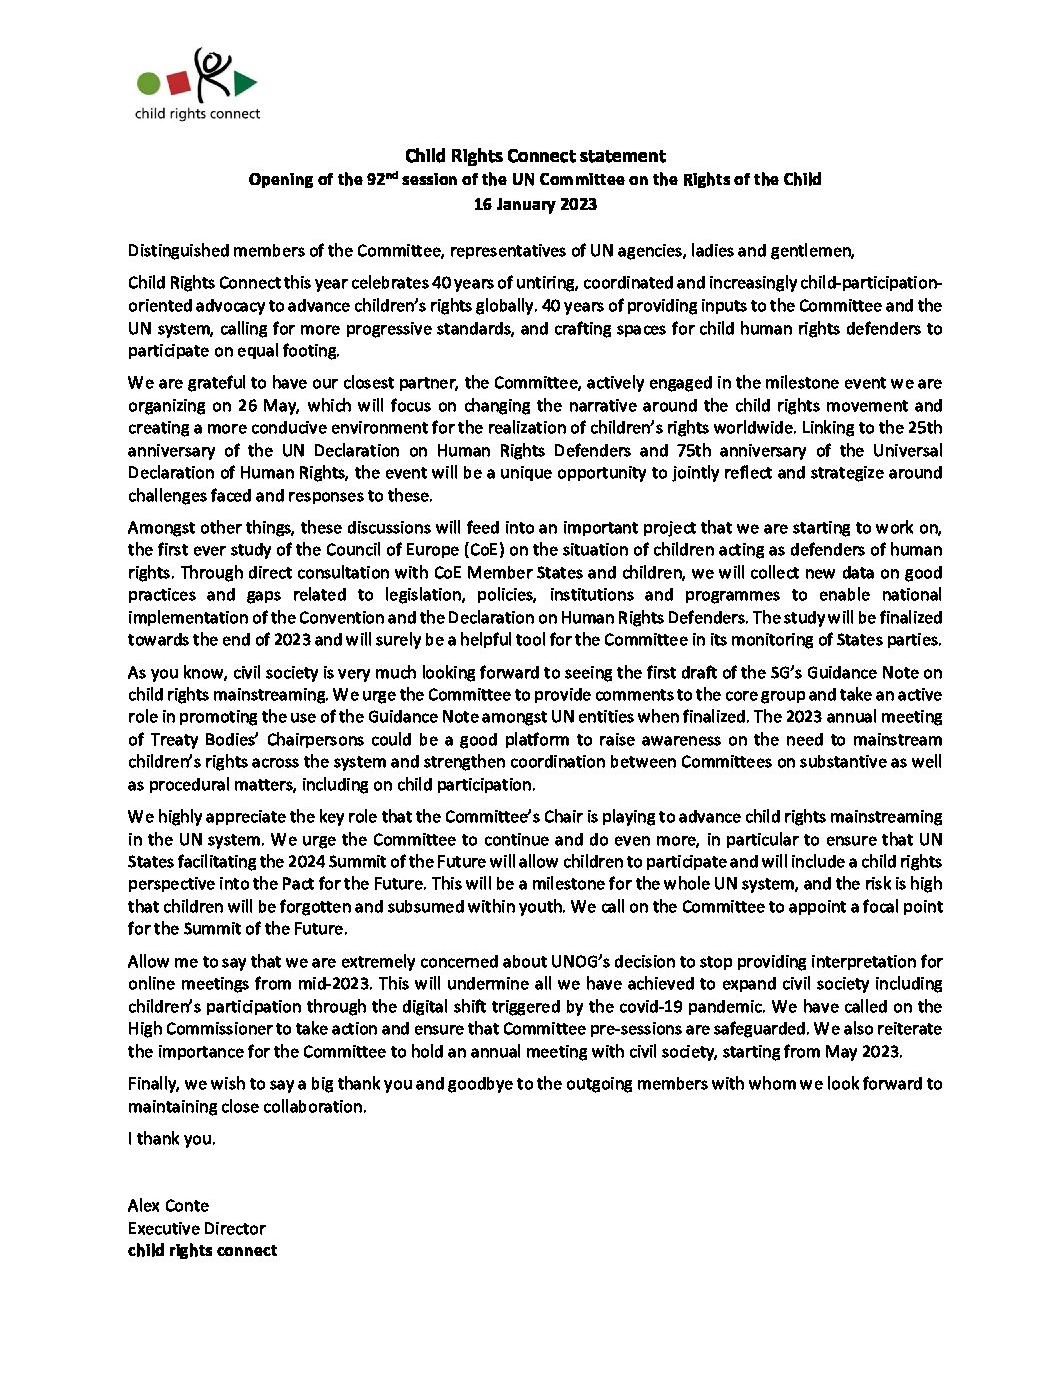 Child Rights Connect Statement on the 92nd session